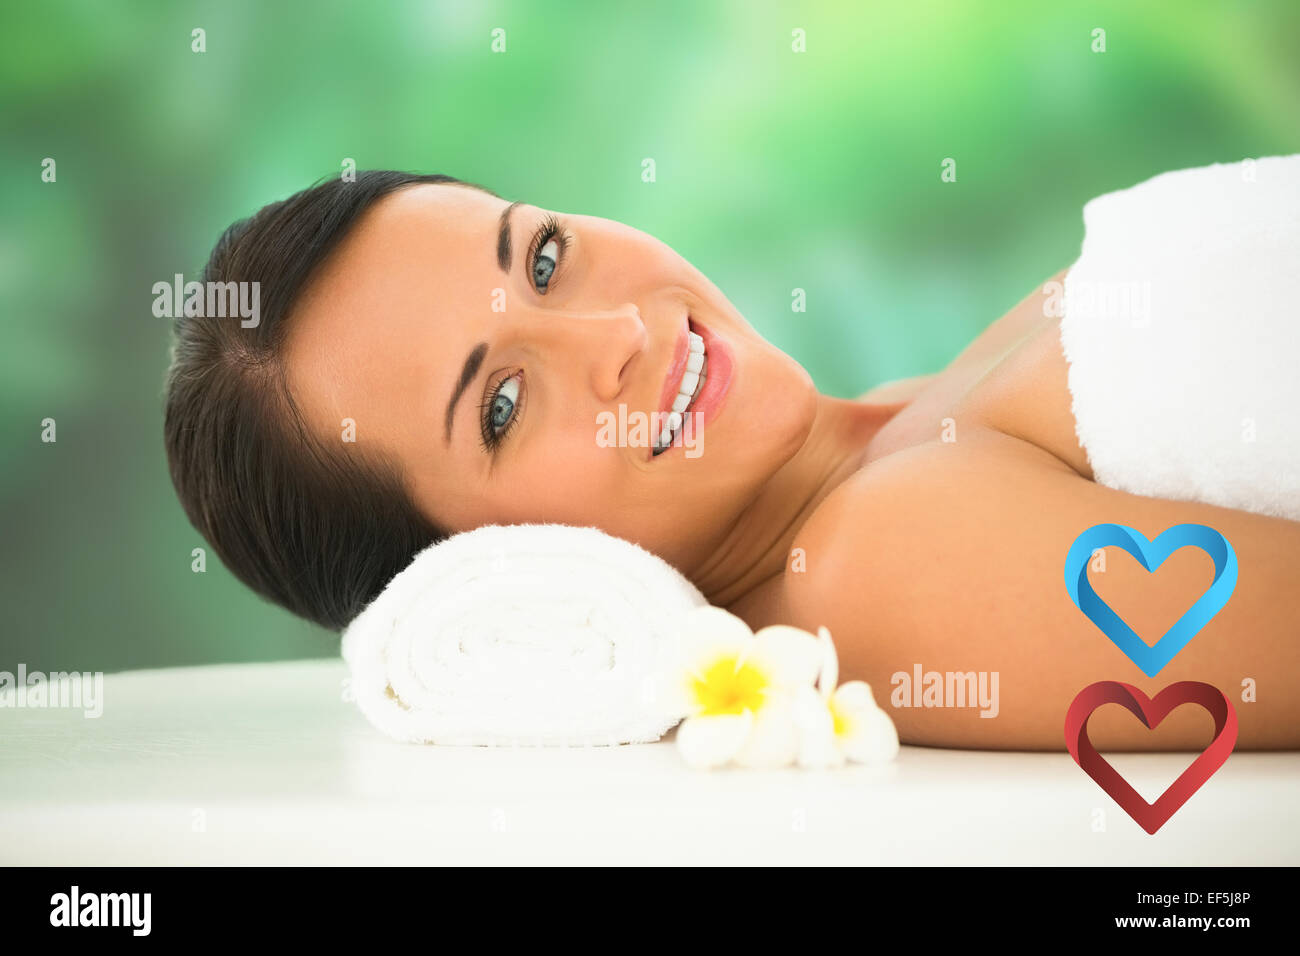 Composite image of beautiful brunette relaxing on massage table smiling at camera Stock Photo